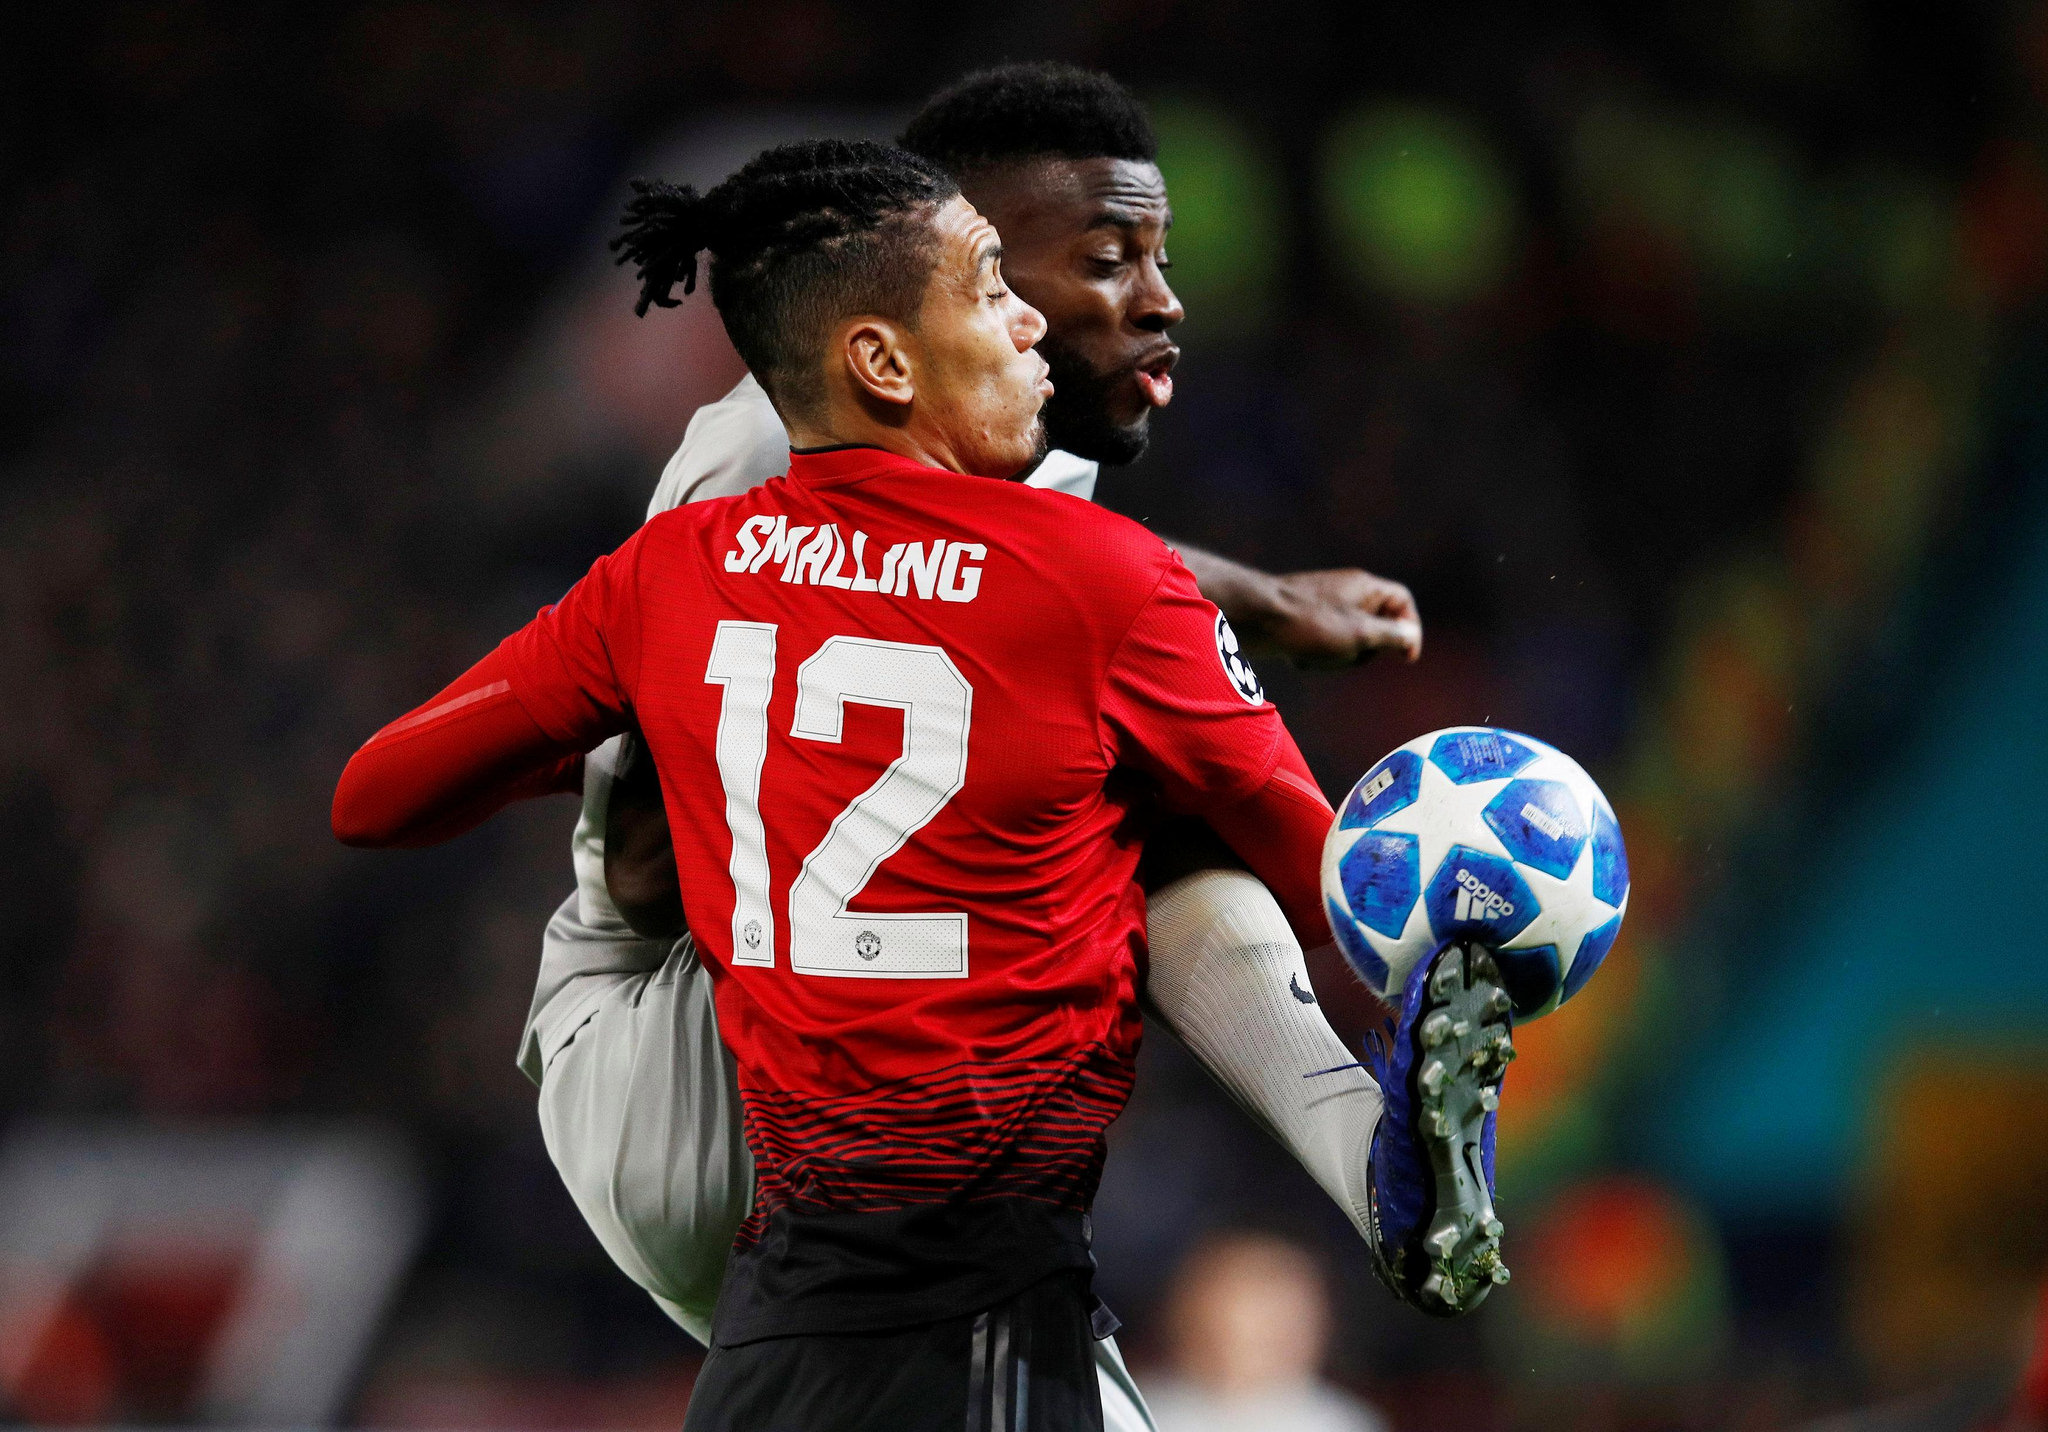 UCL: Valencia vs Manchester United Preview